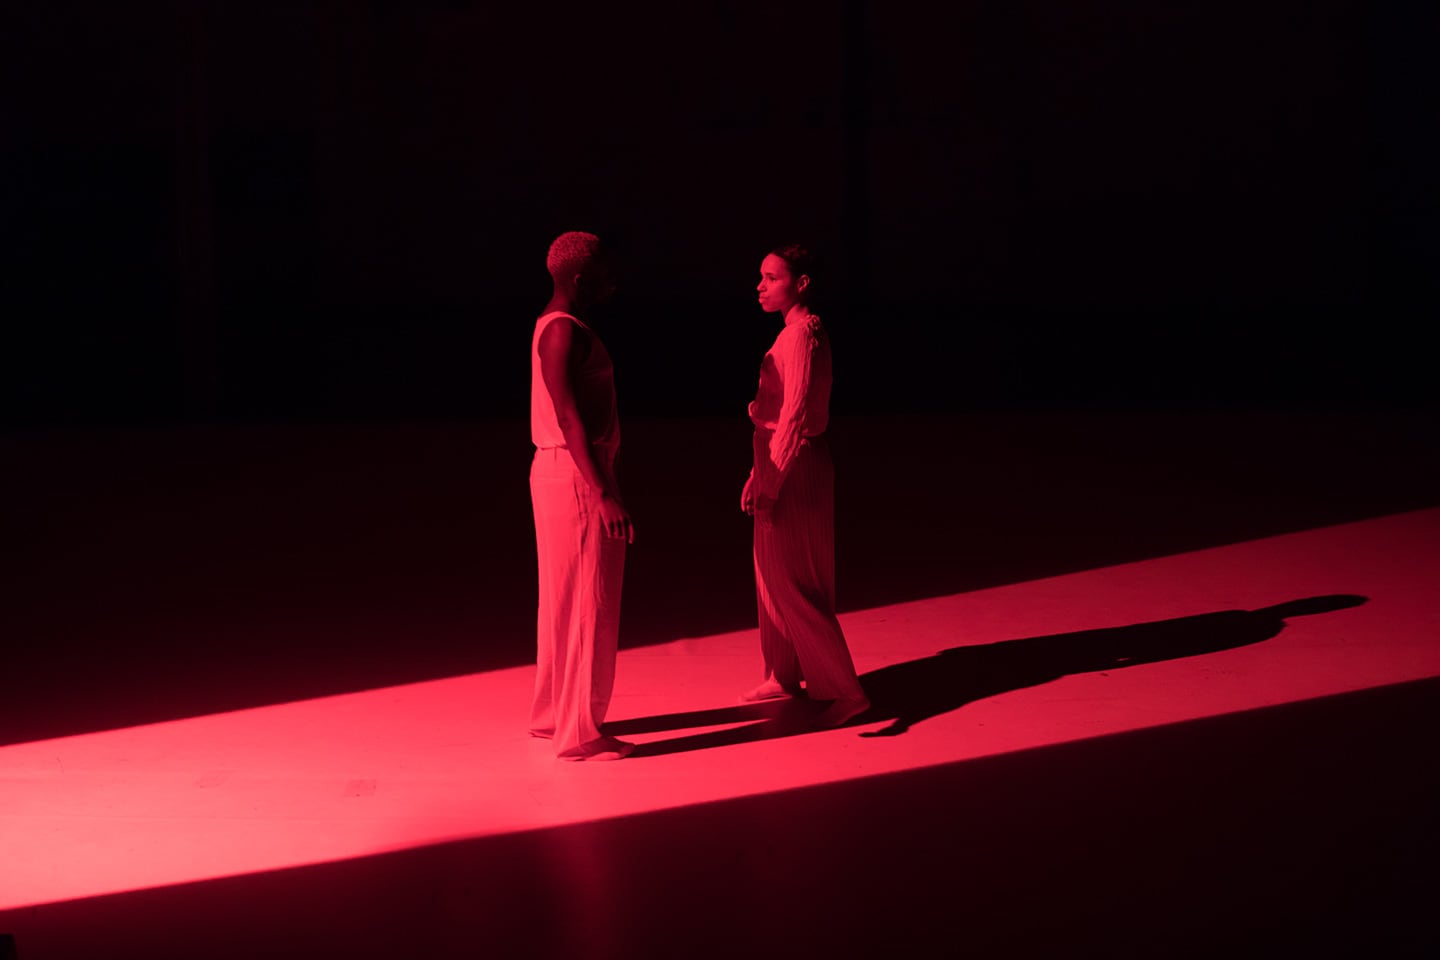 Two figures face each other in a strip of diagonal red light